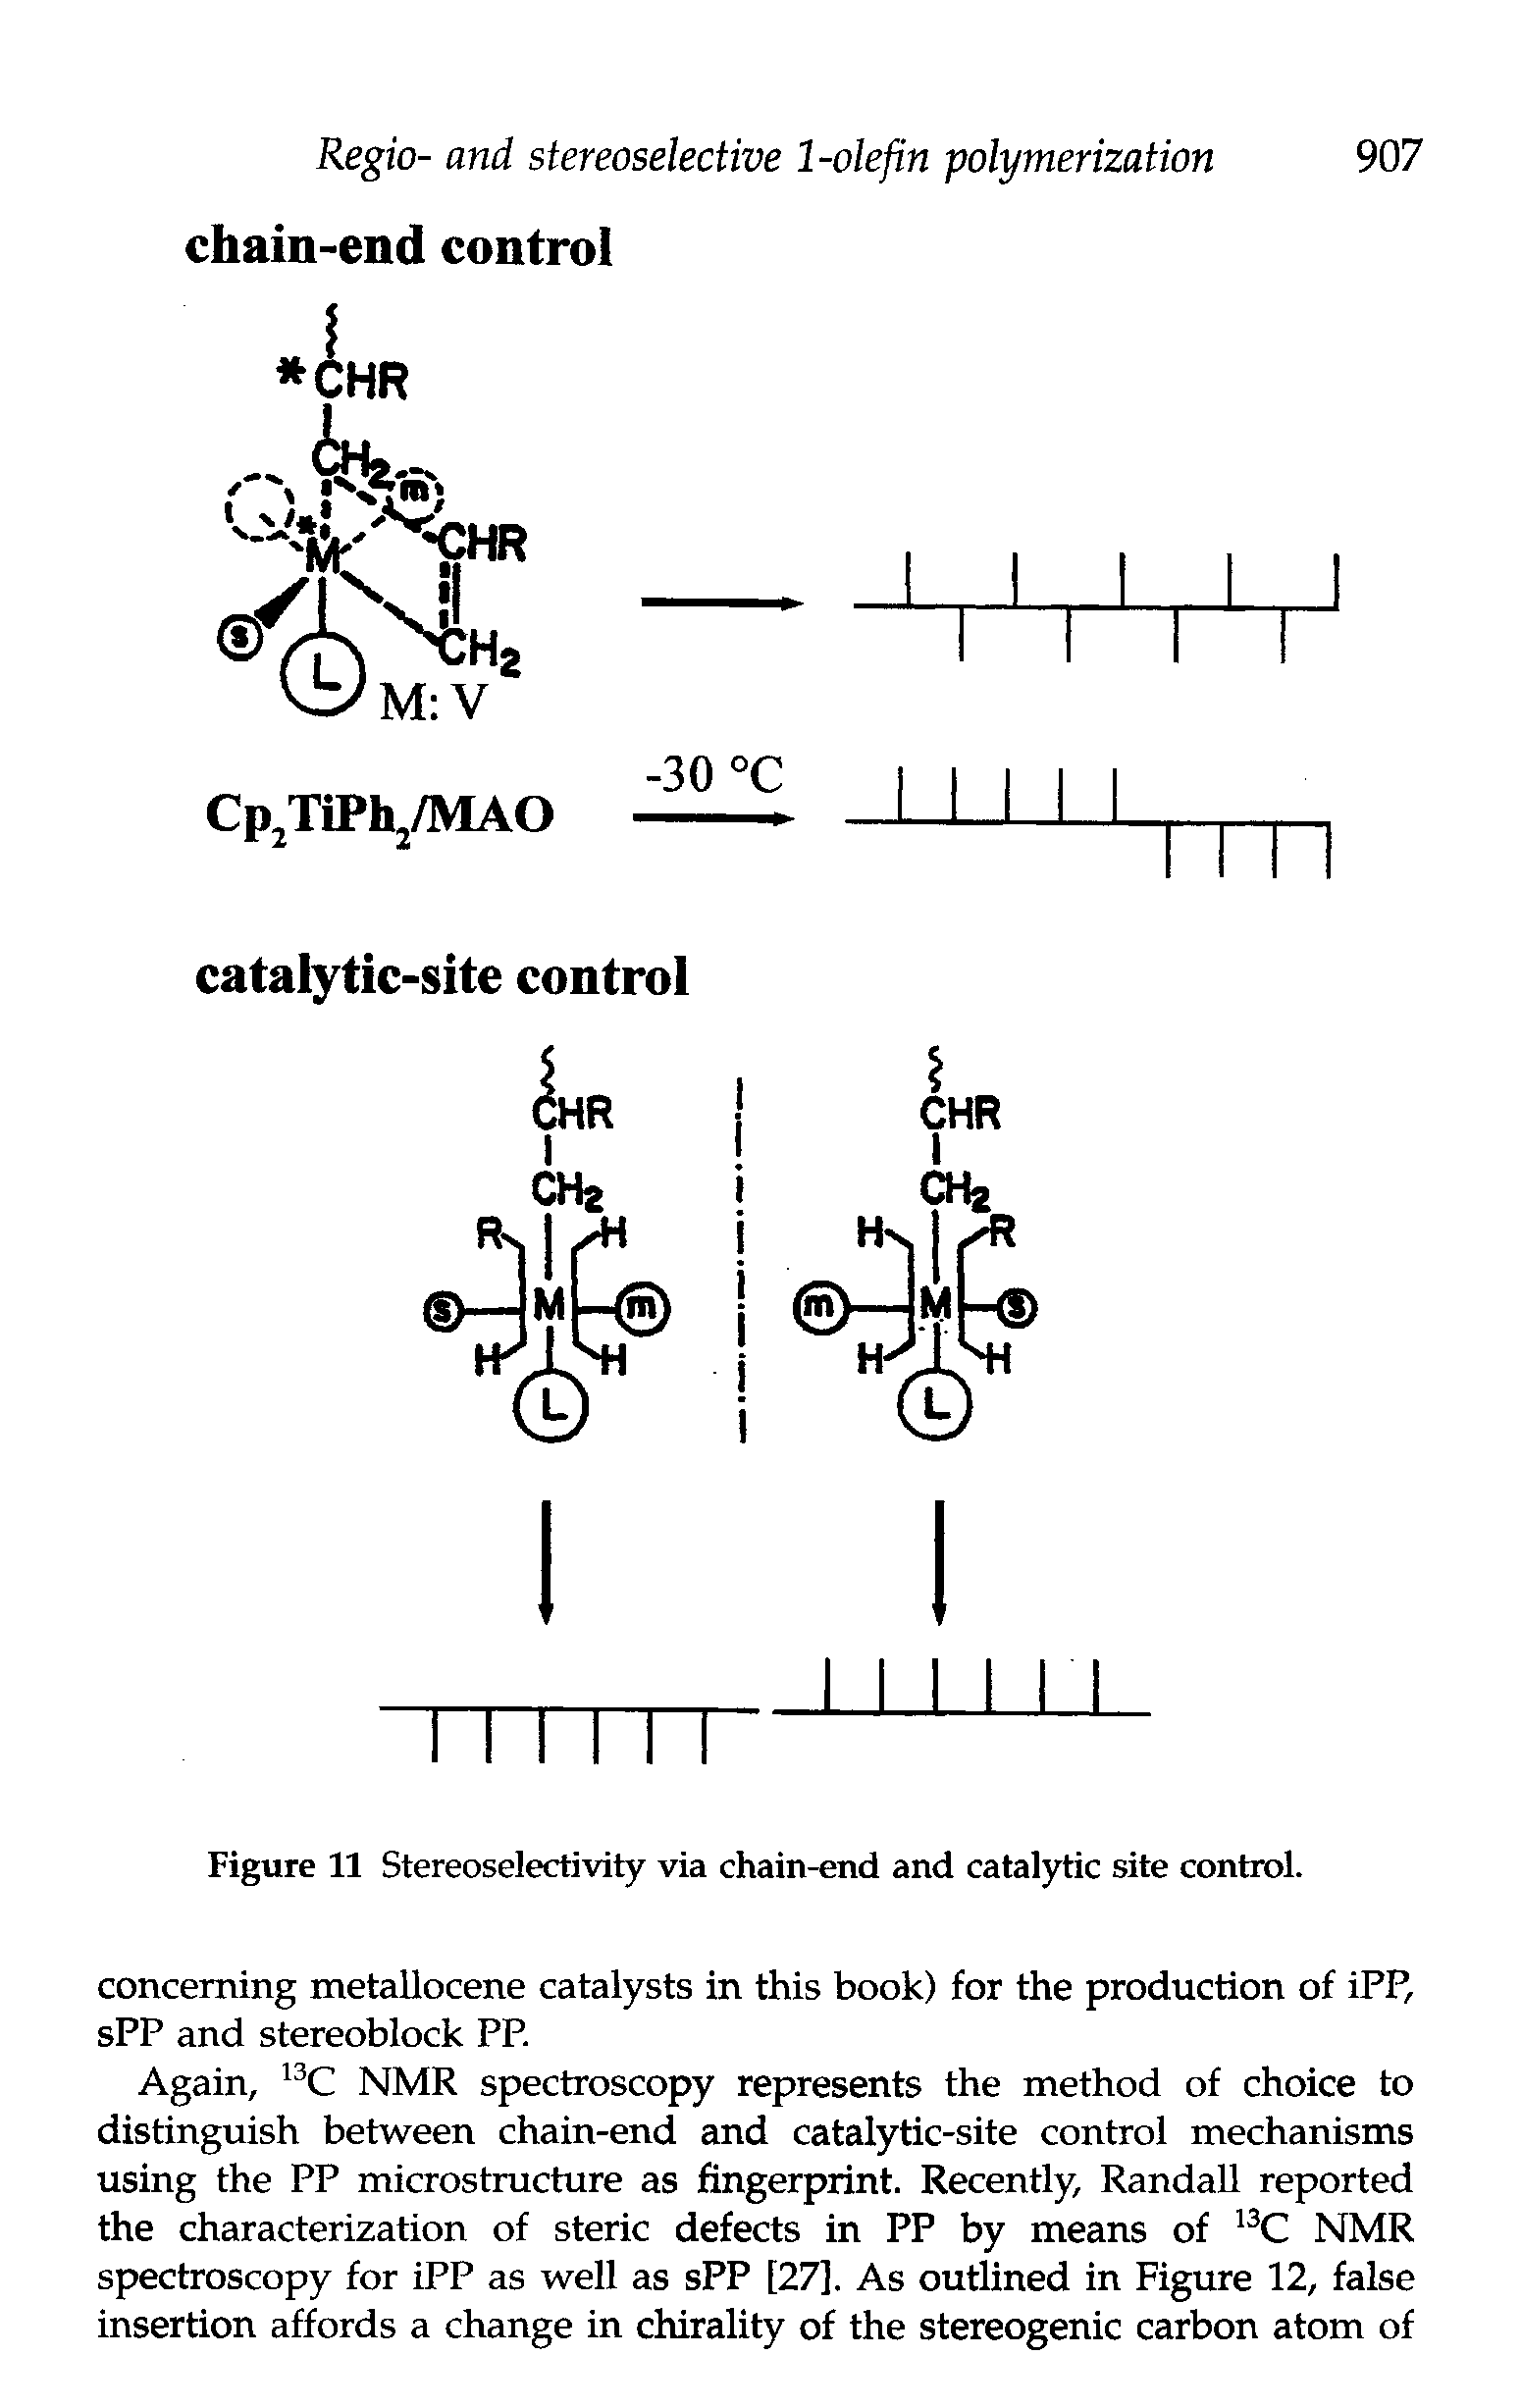 Figure 11 Stereoselectivity via chain-end and catalytic site control.